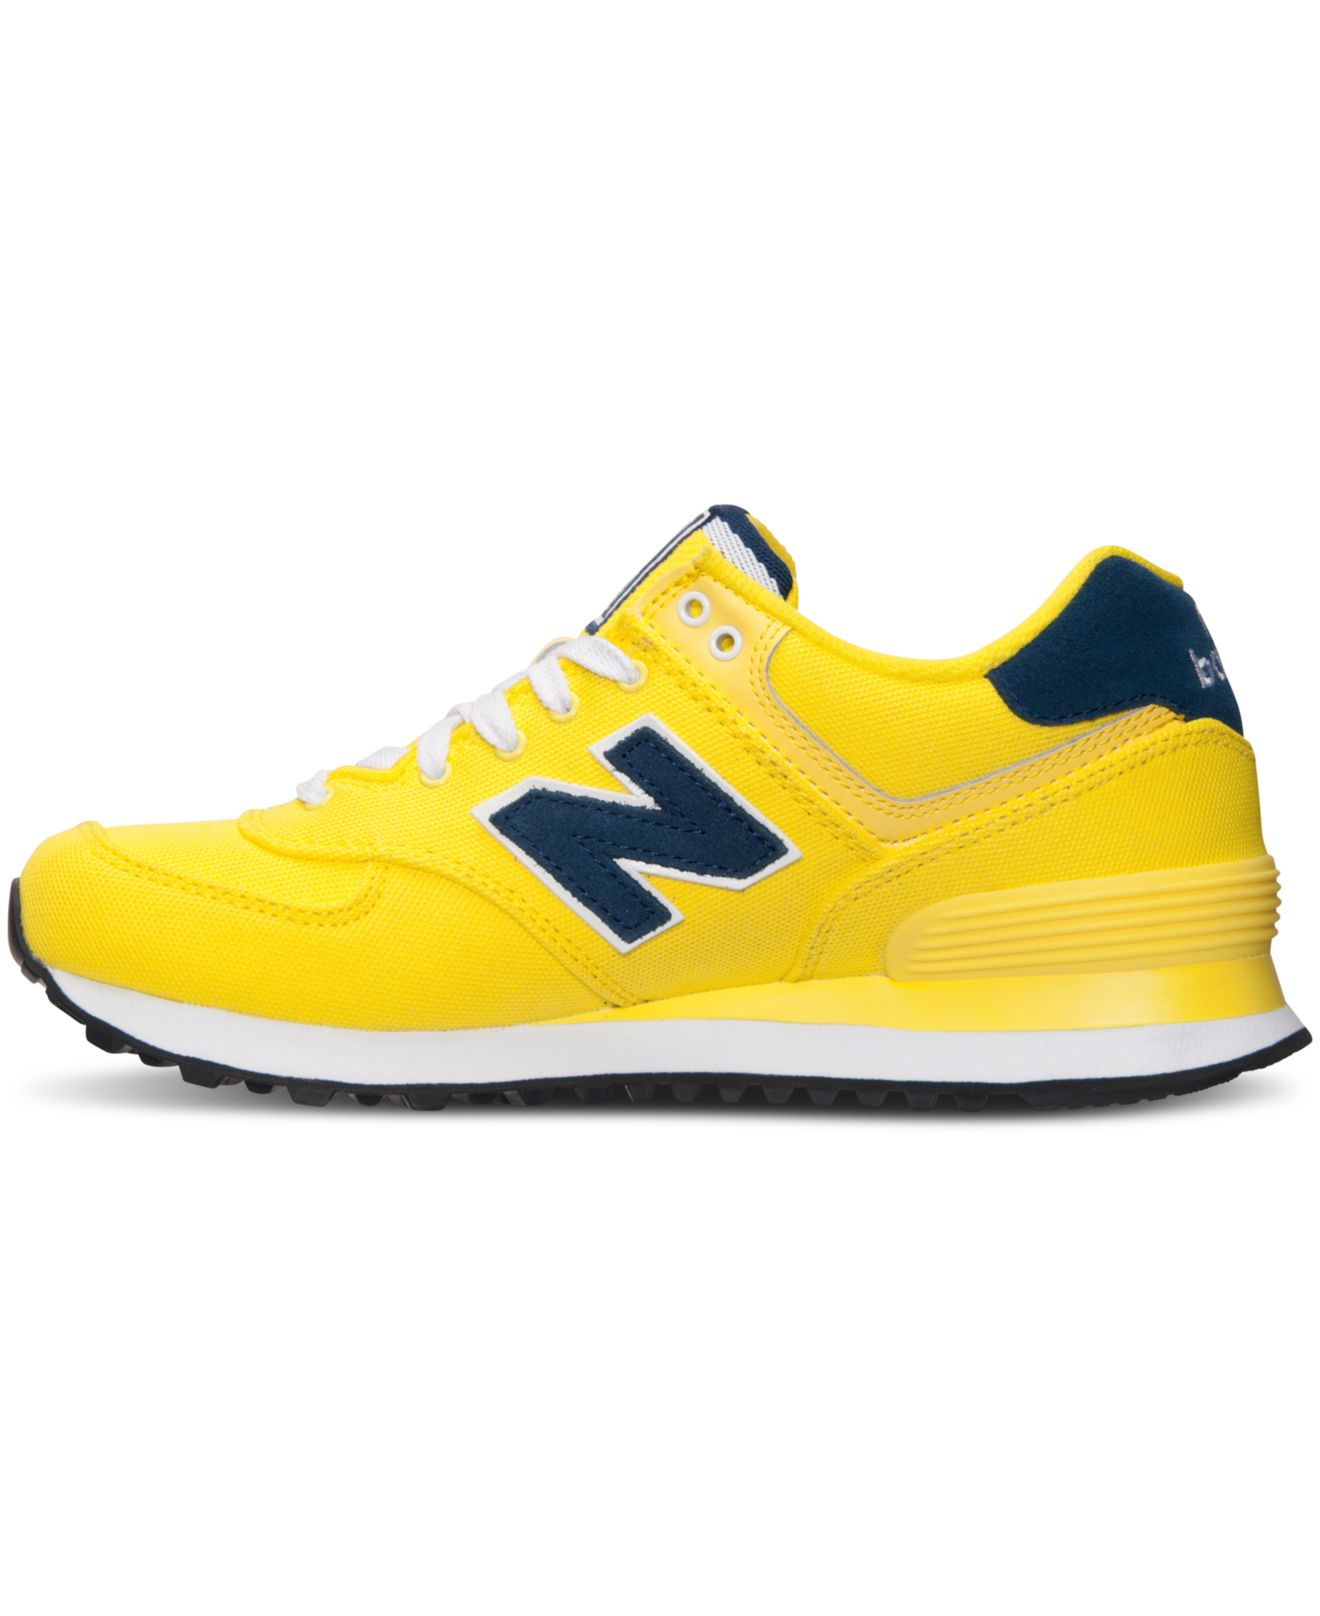 New Balance Women's 574 Casual Sneakers From Finish Line